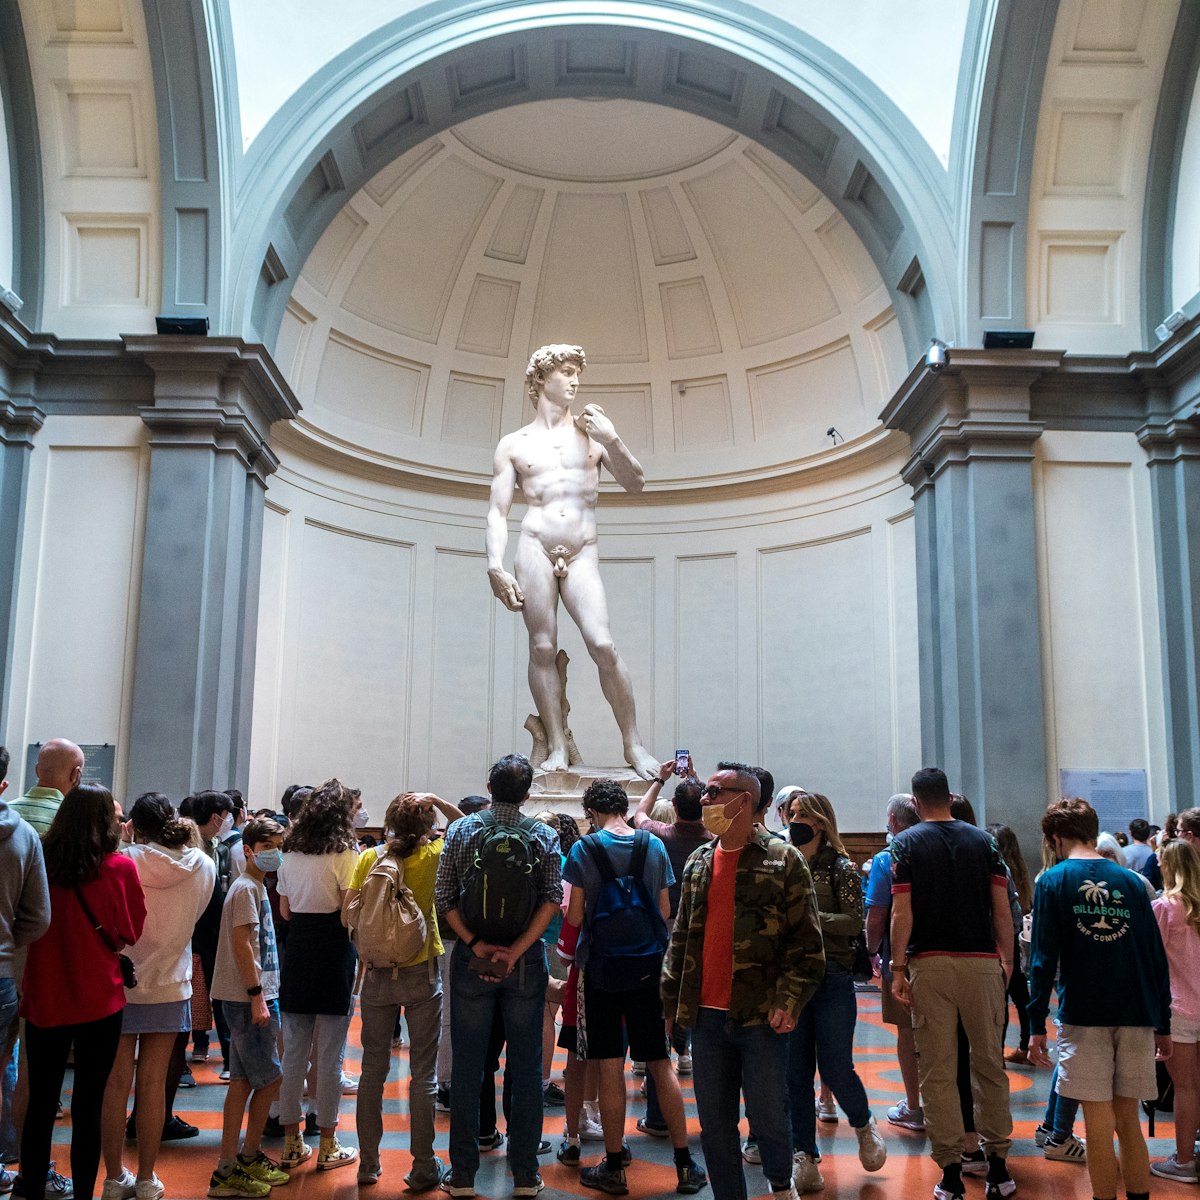 Crowded gallery by tourists trying to take photo to david sculpture in accademia.